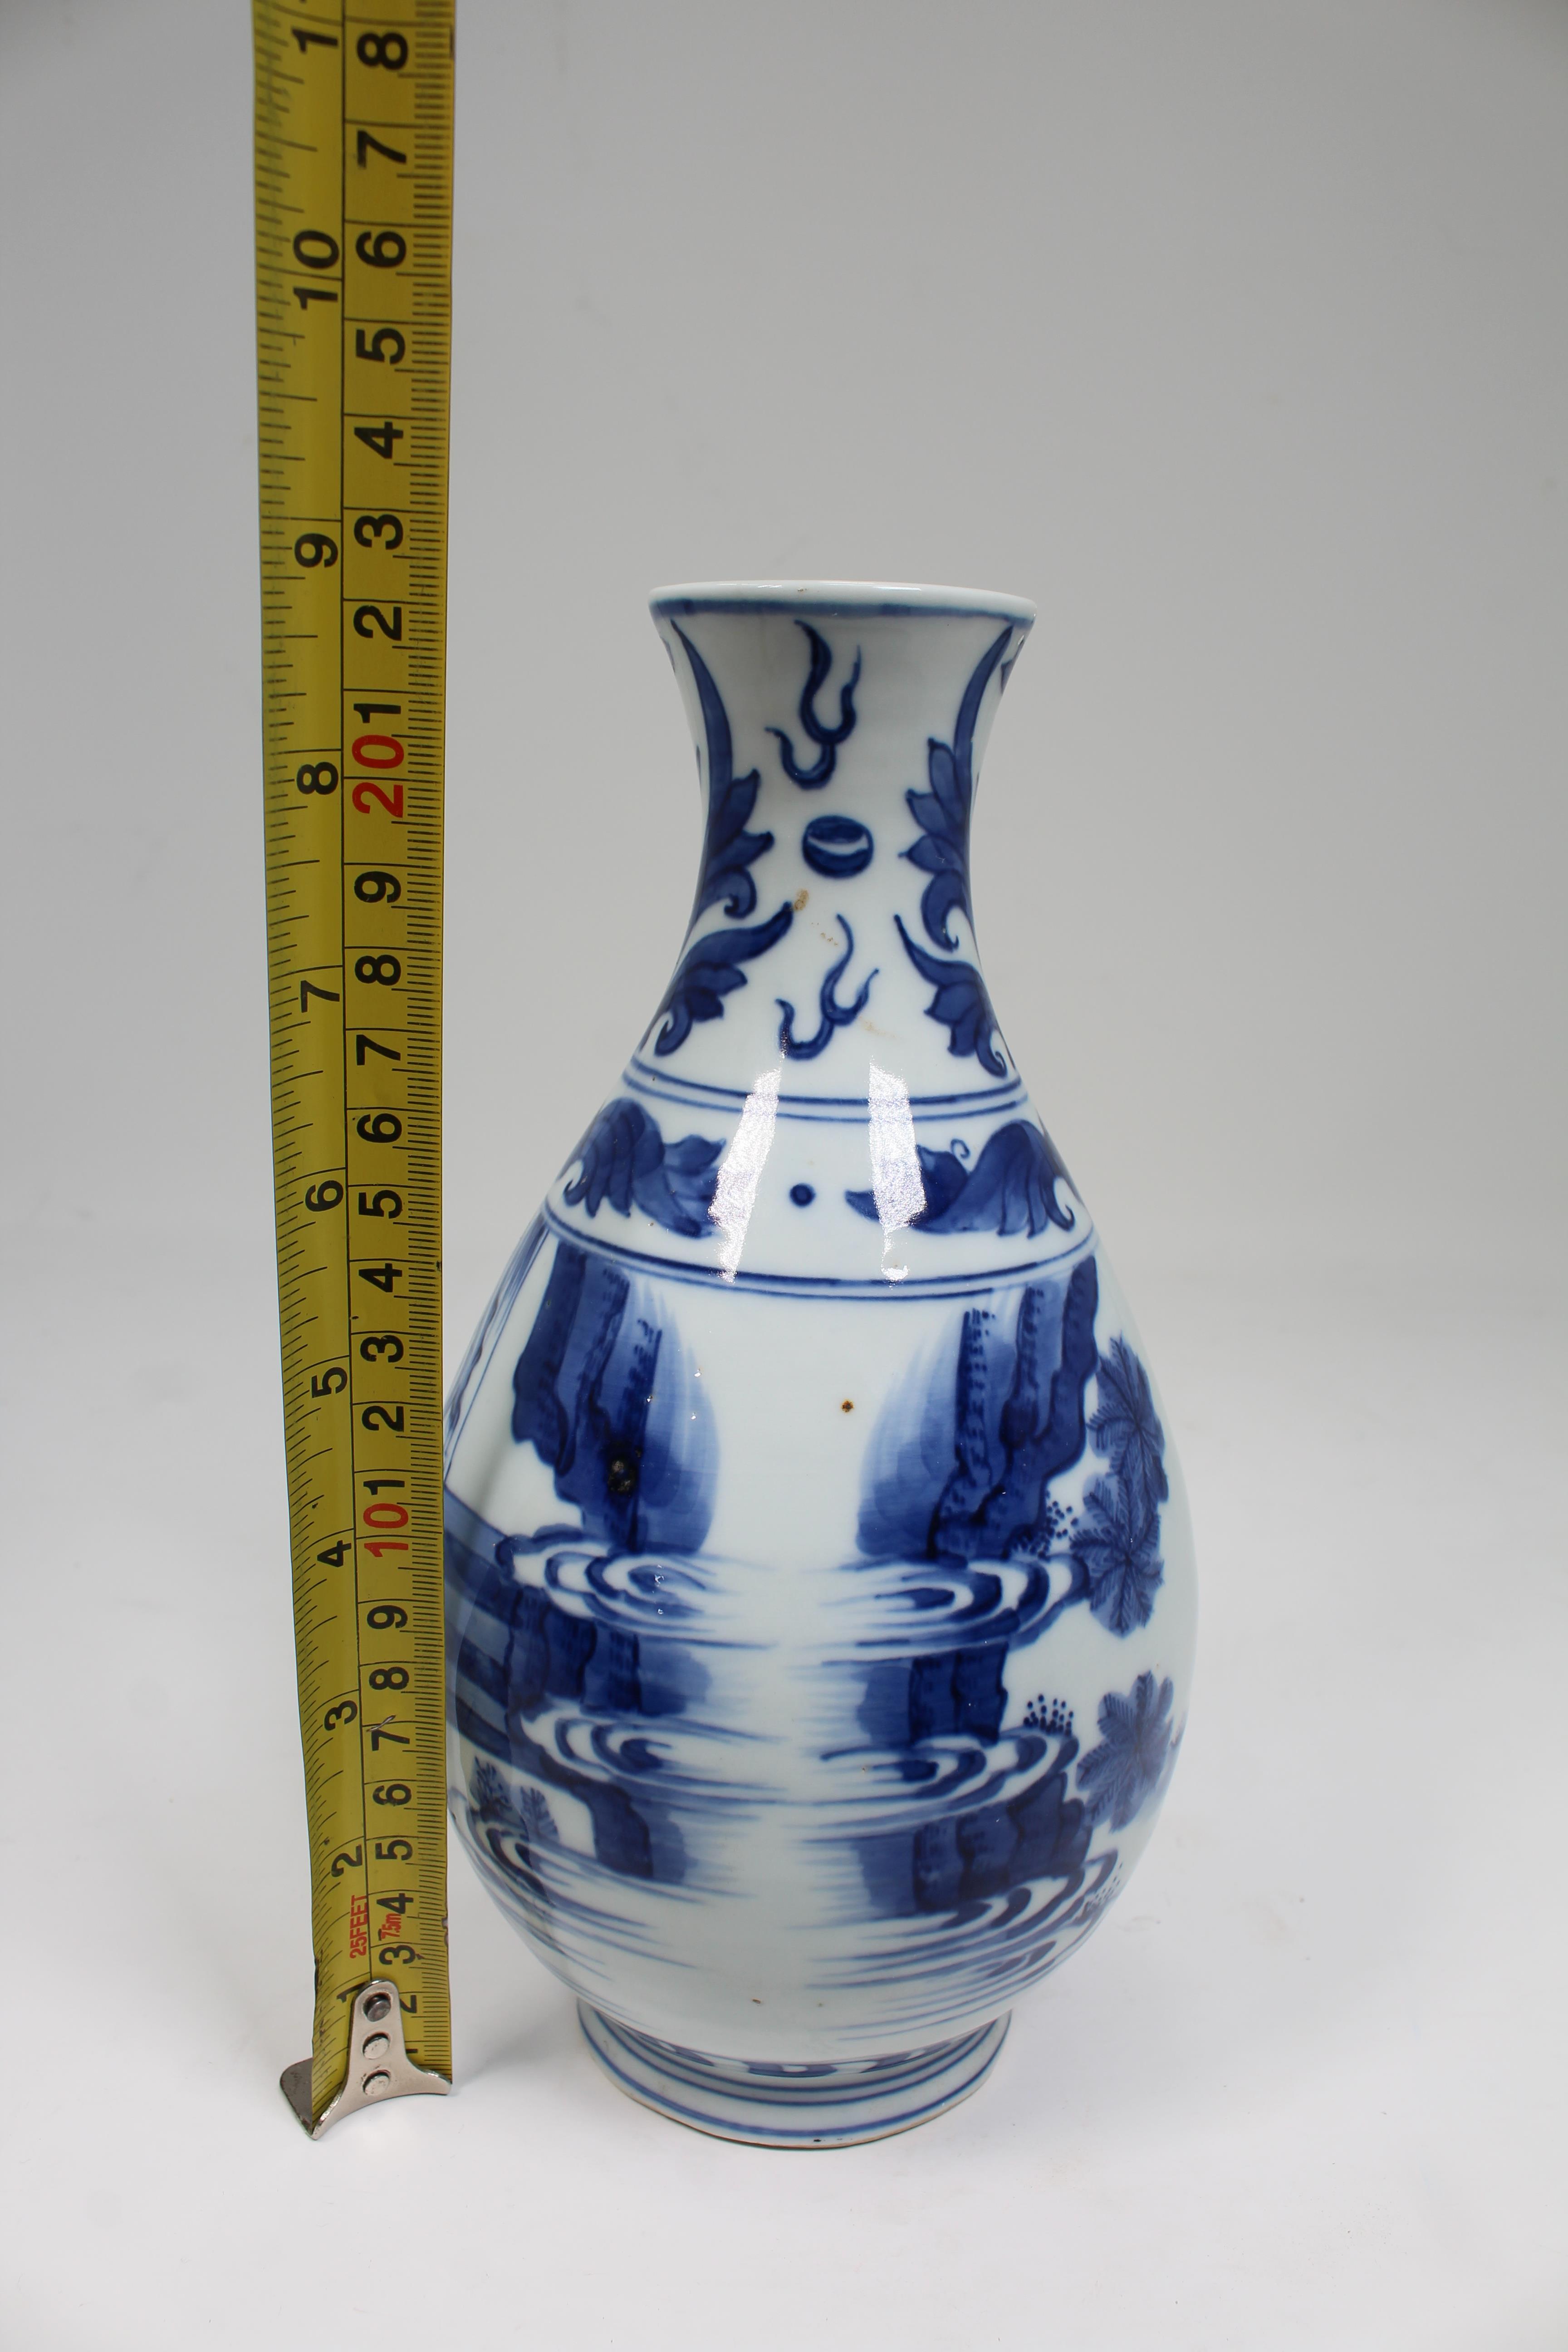 Chinese Blue/White Porcelain Vase. Scene depicts figures conversing. Size: 9 x 4.75 in. - Image 8 of 8